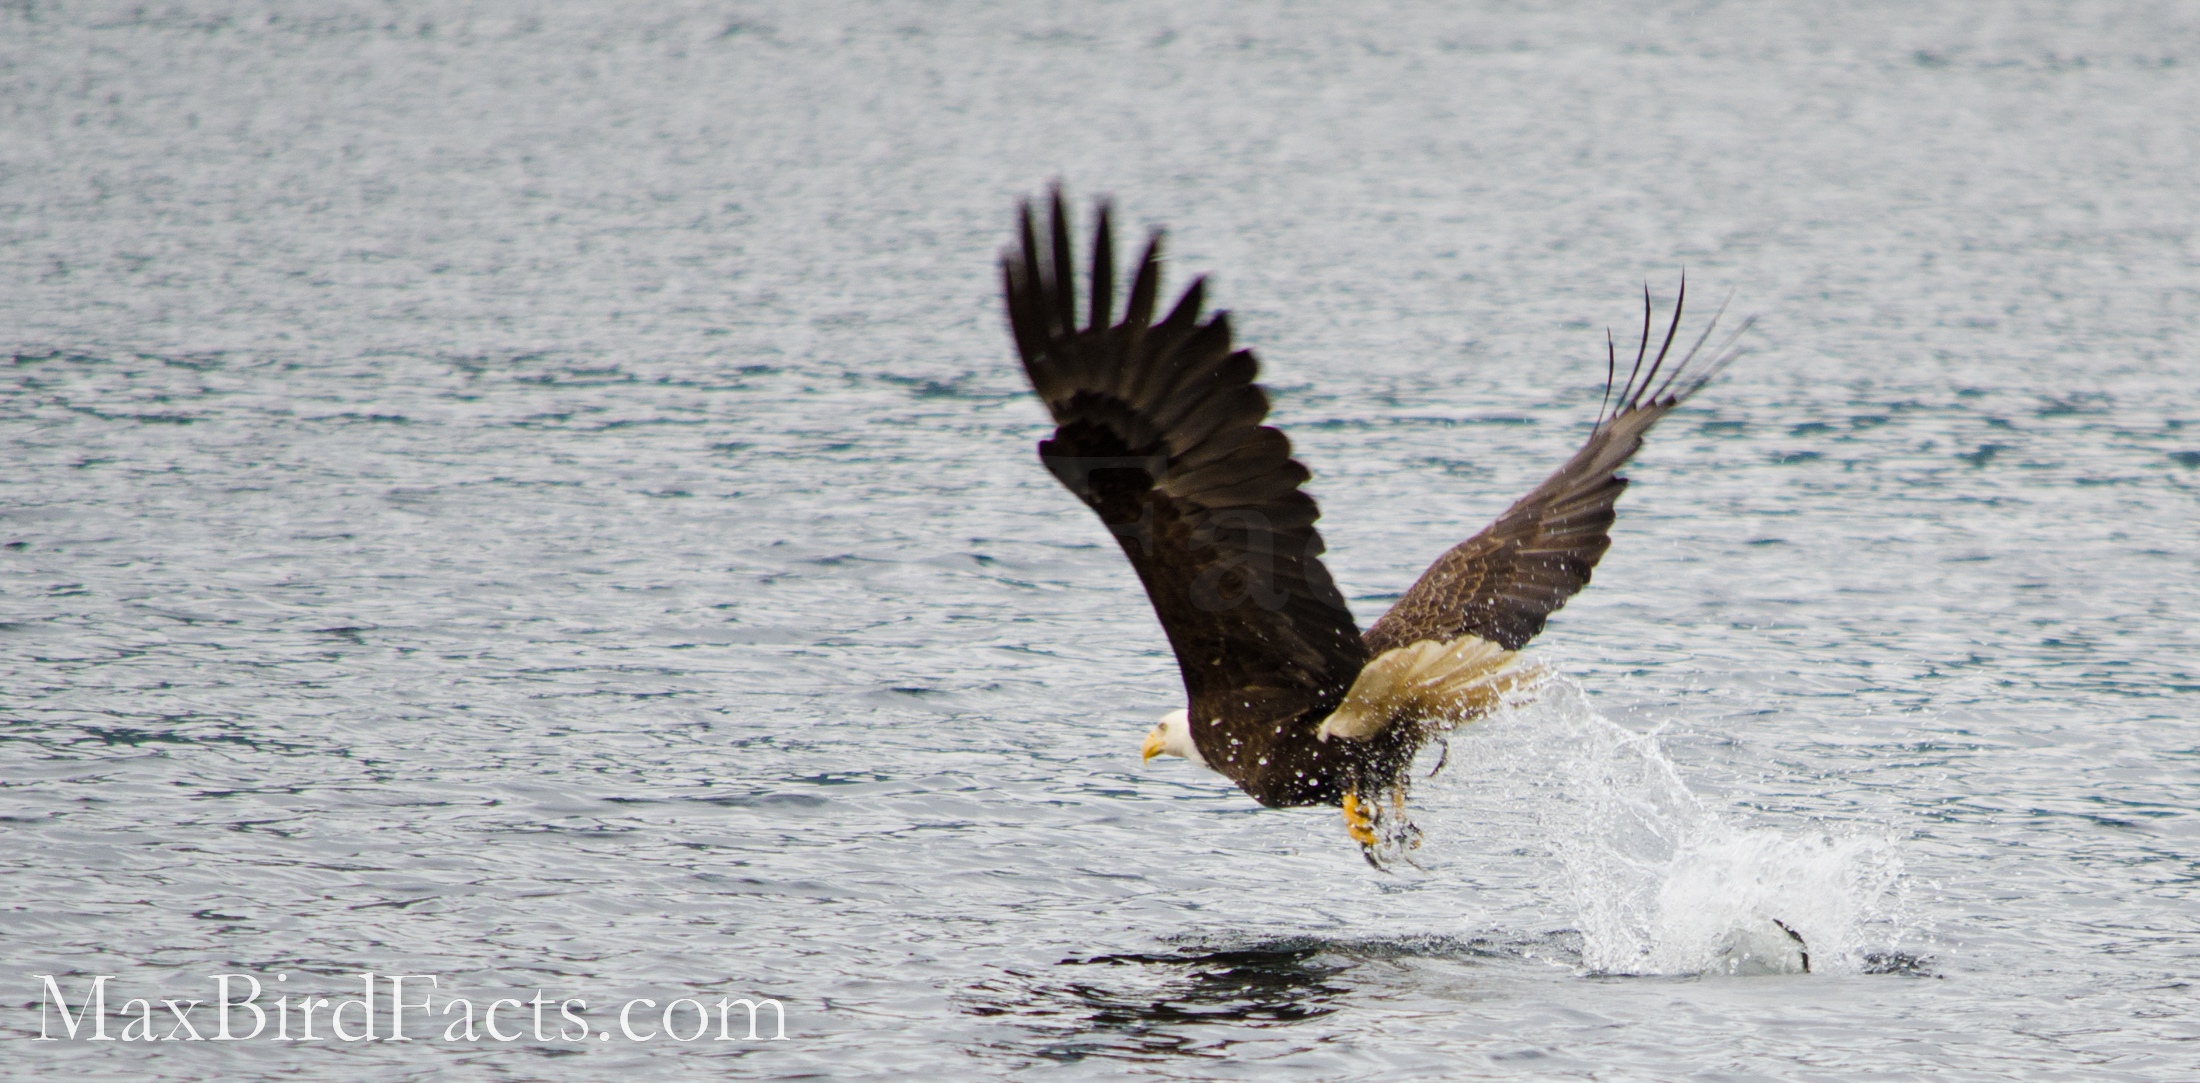 How_Far_Can_An_Eagle_See_bald_eagle_catching_fish